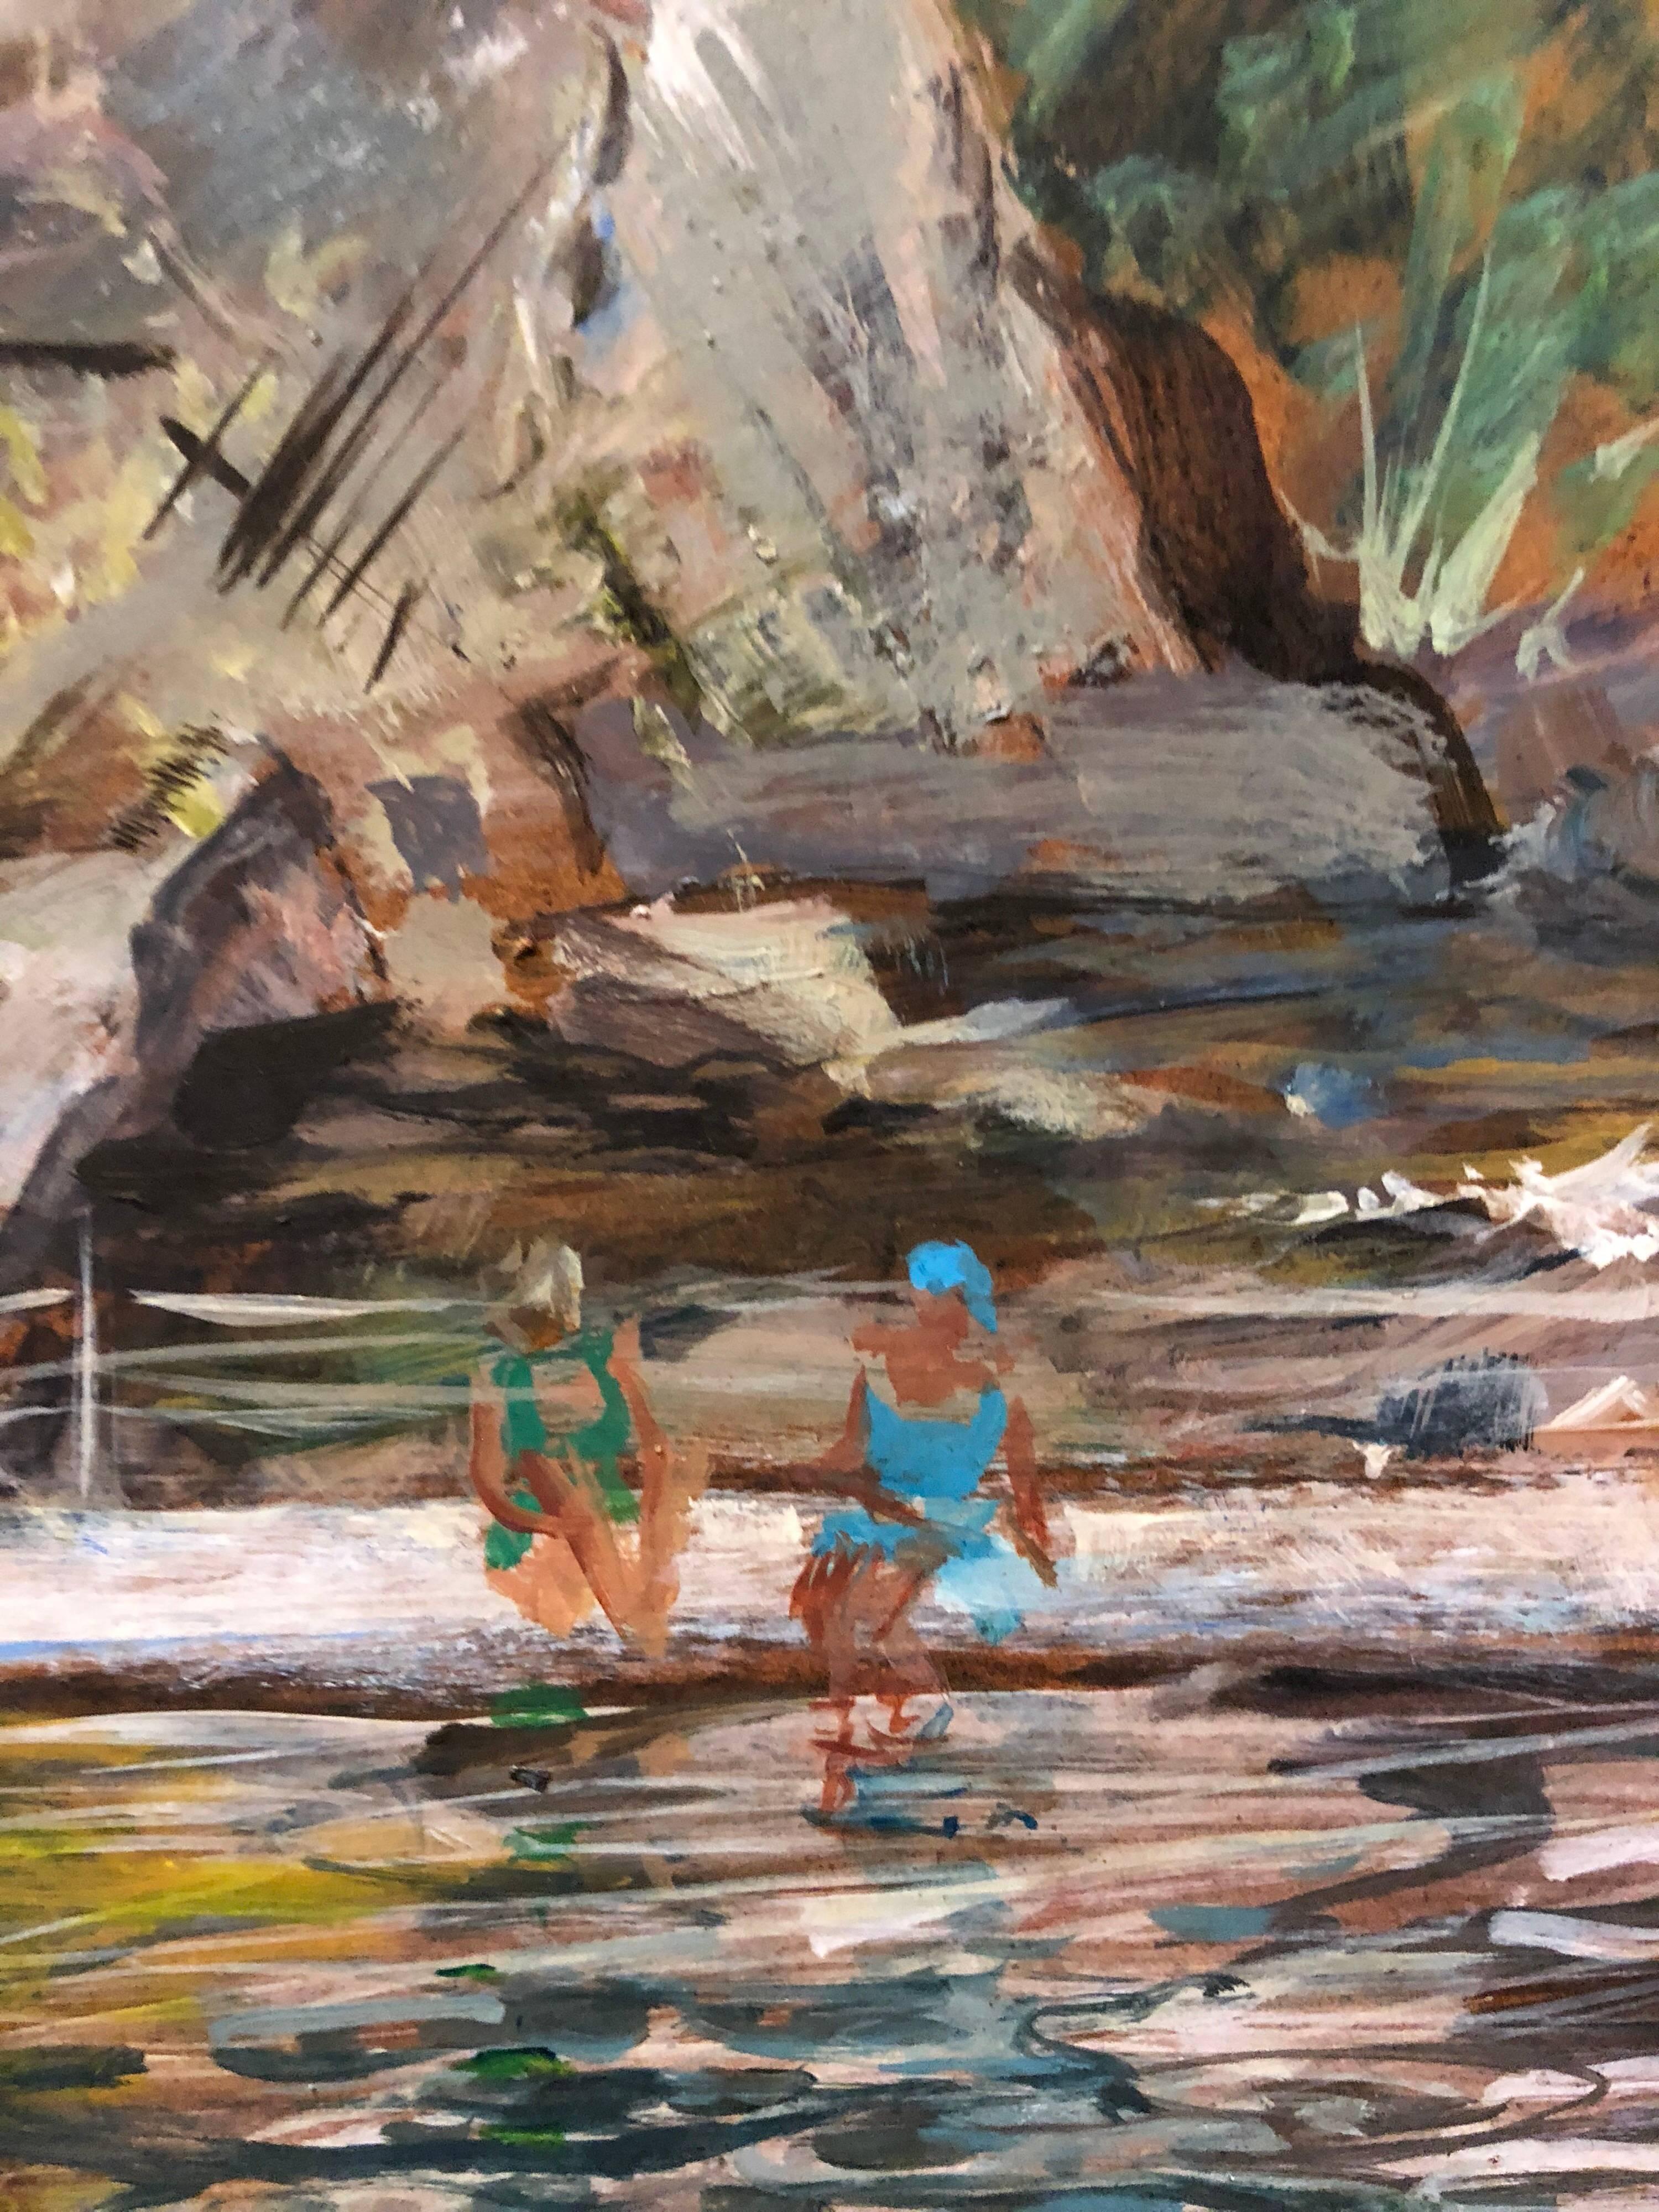 Bathers at the Quarry 1940s American Modernist Oil Painting WPA era - Gray Figurative Painting by Theresa Berney Loew